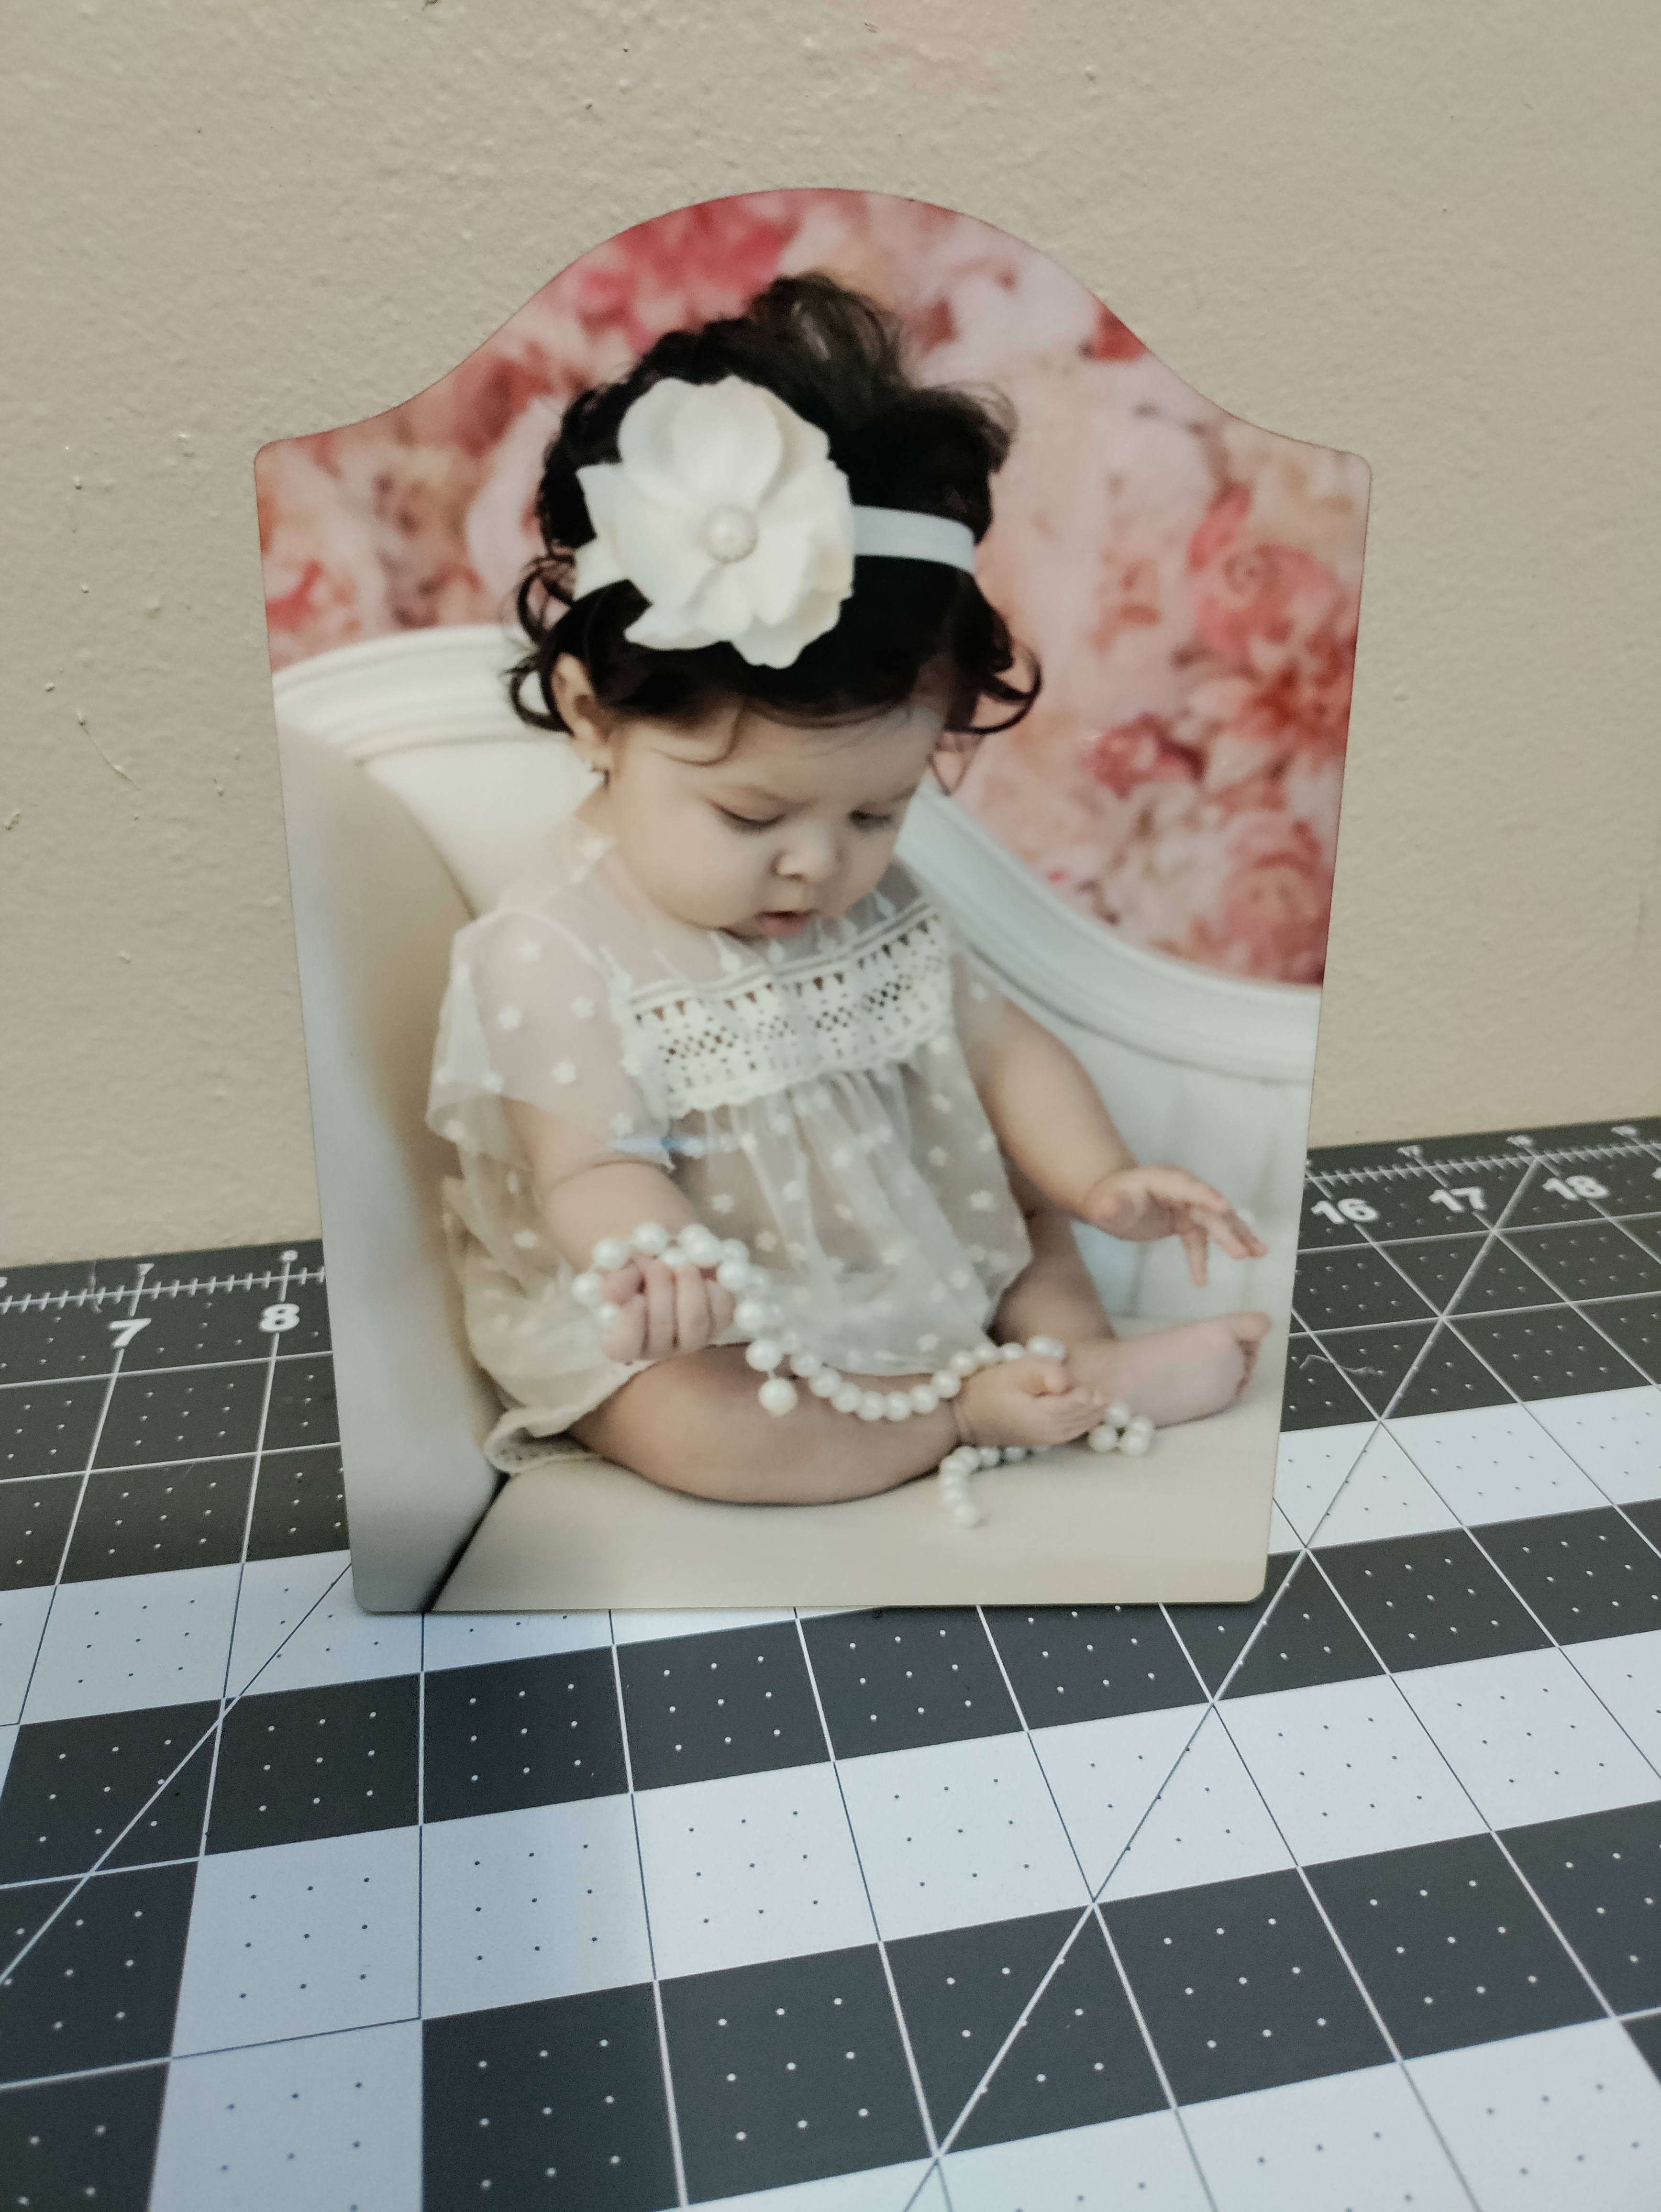 Chromoluxe hardboard photo panel 5x7, arch top with easel